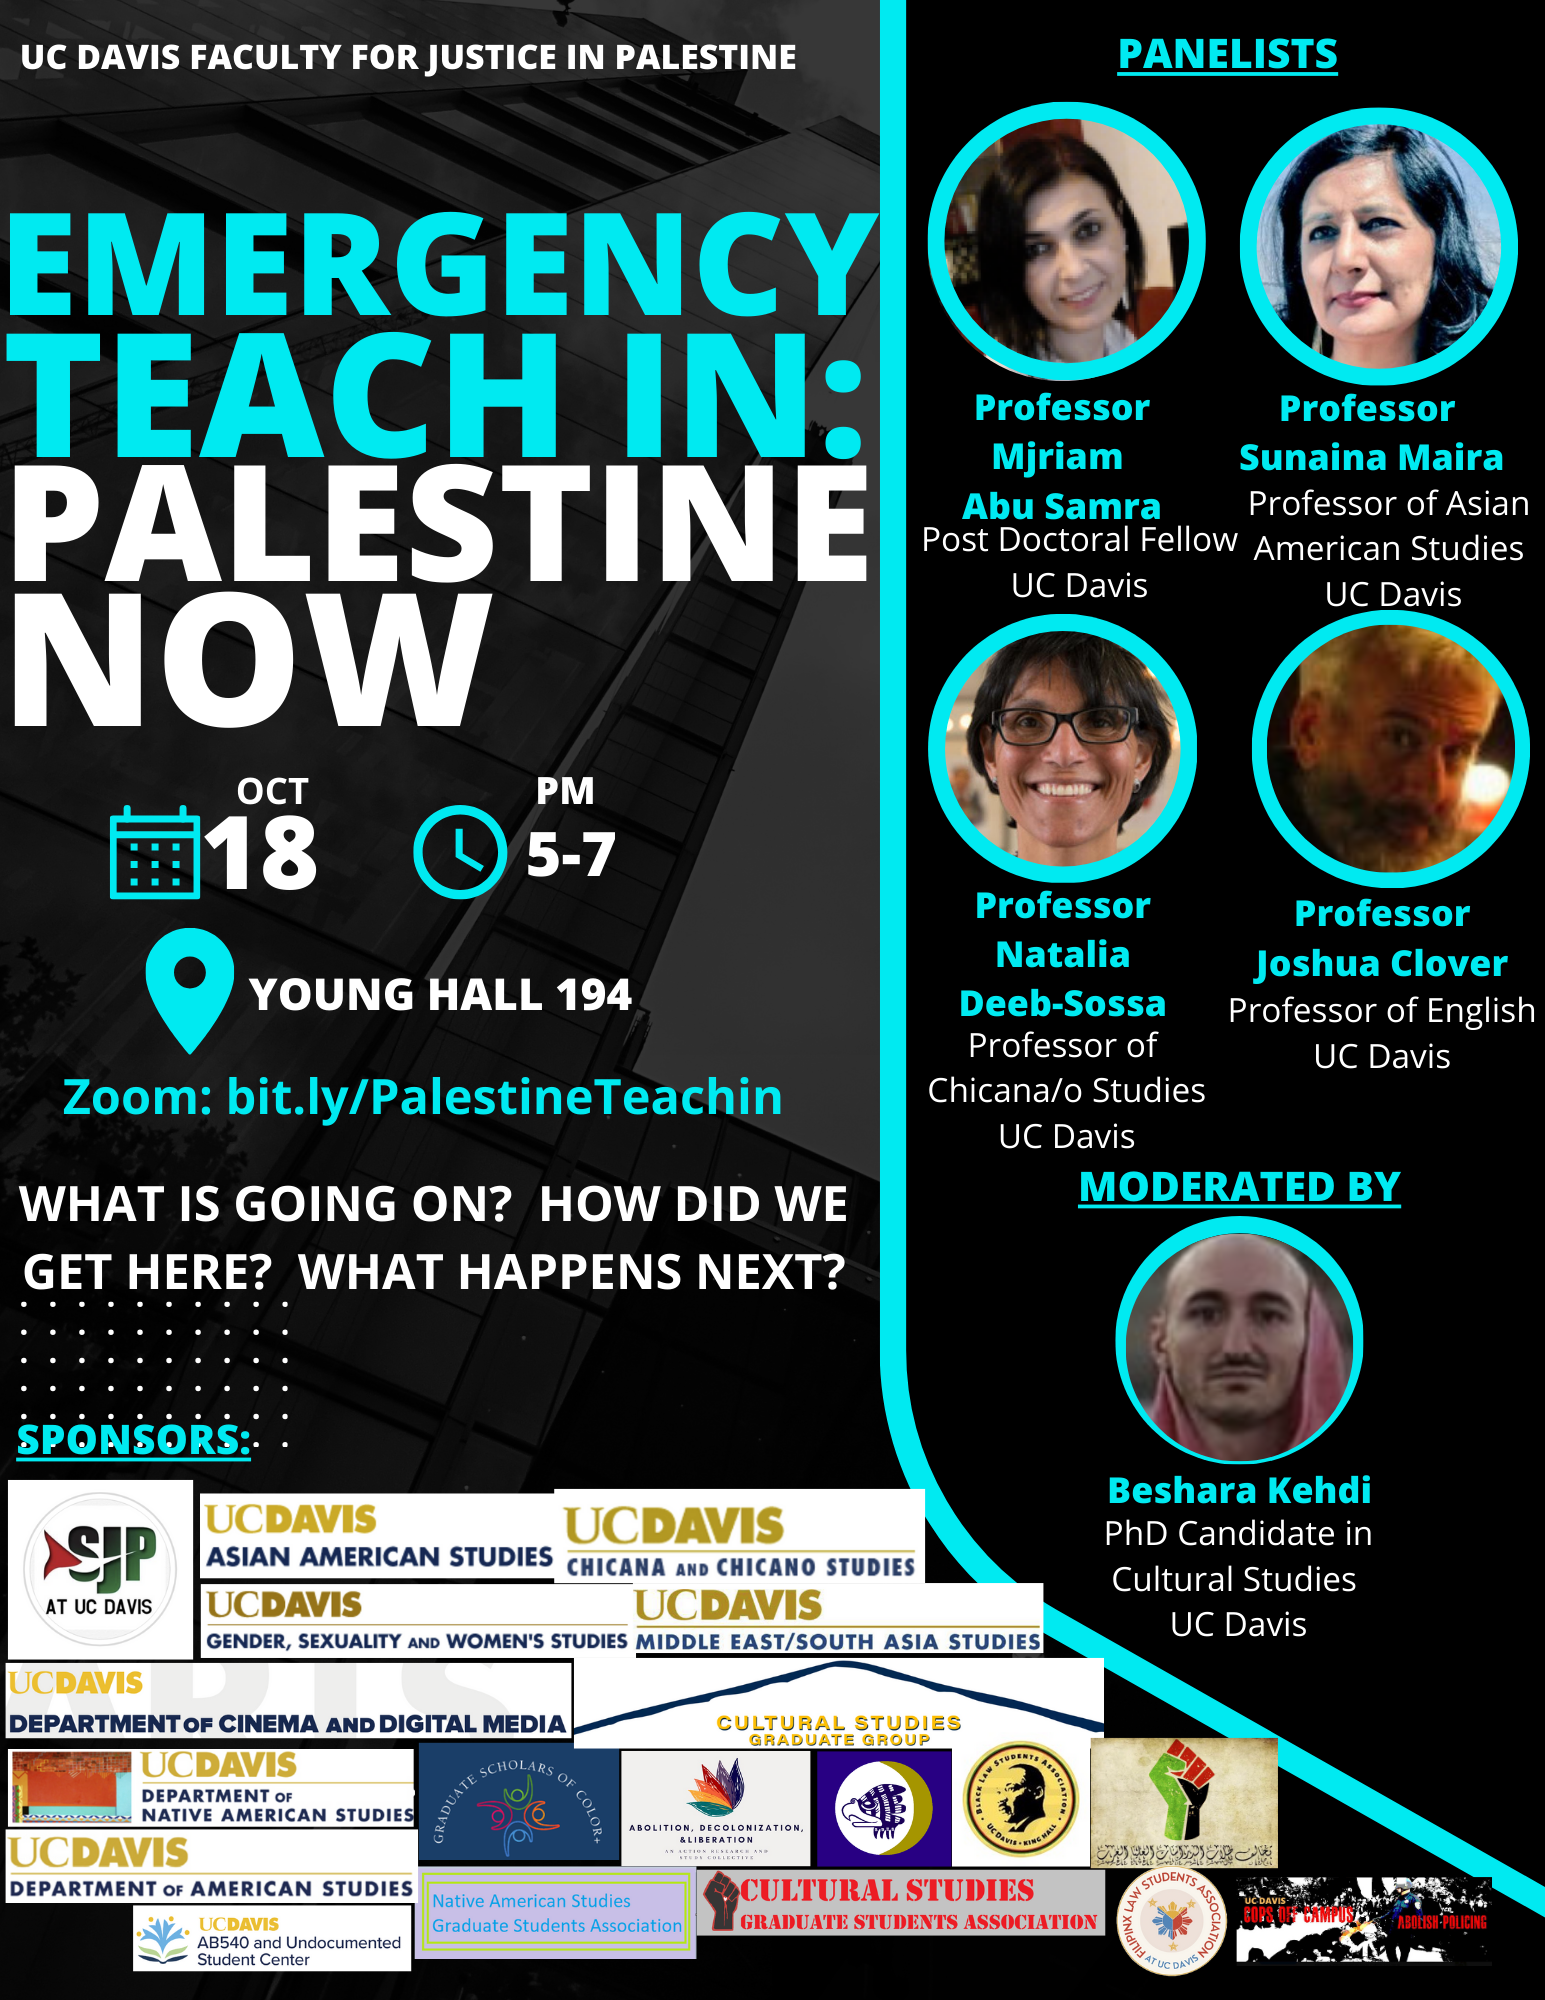 Emergency Teach In Palestine Now Event Flyer Wednesday 5-7pm at Young Hall 198